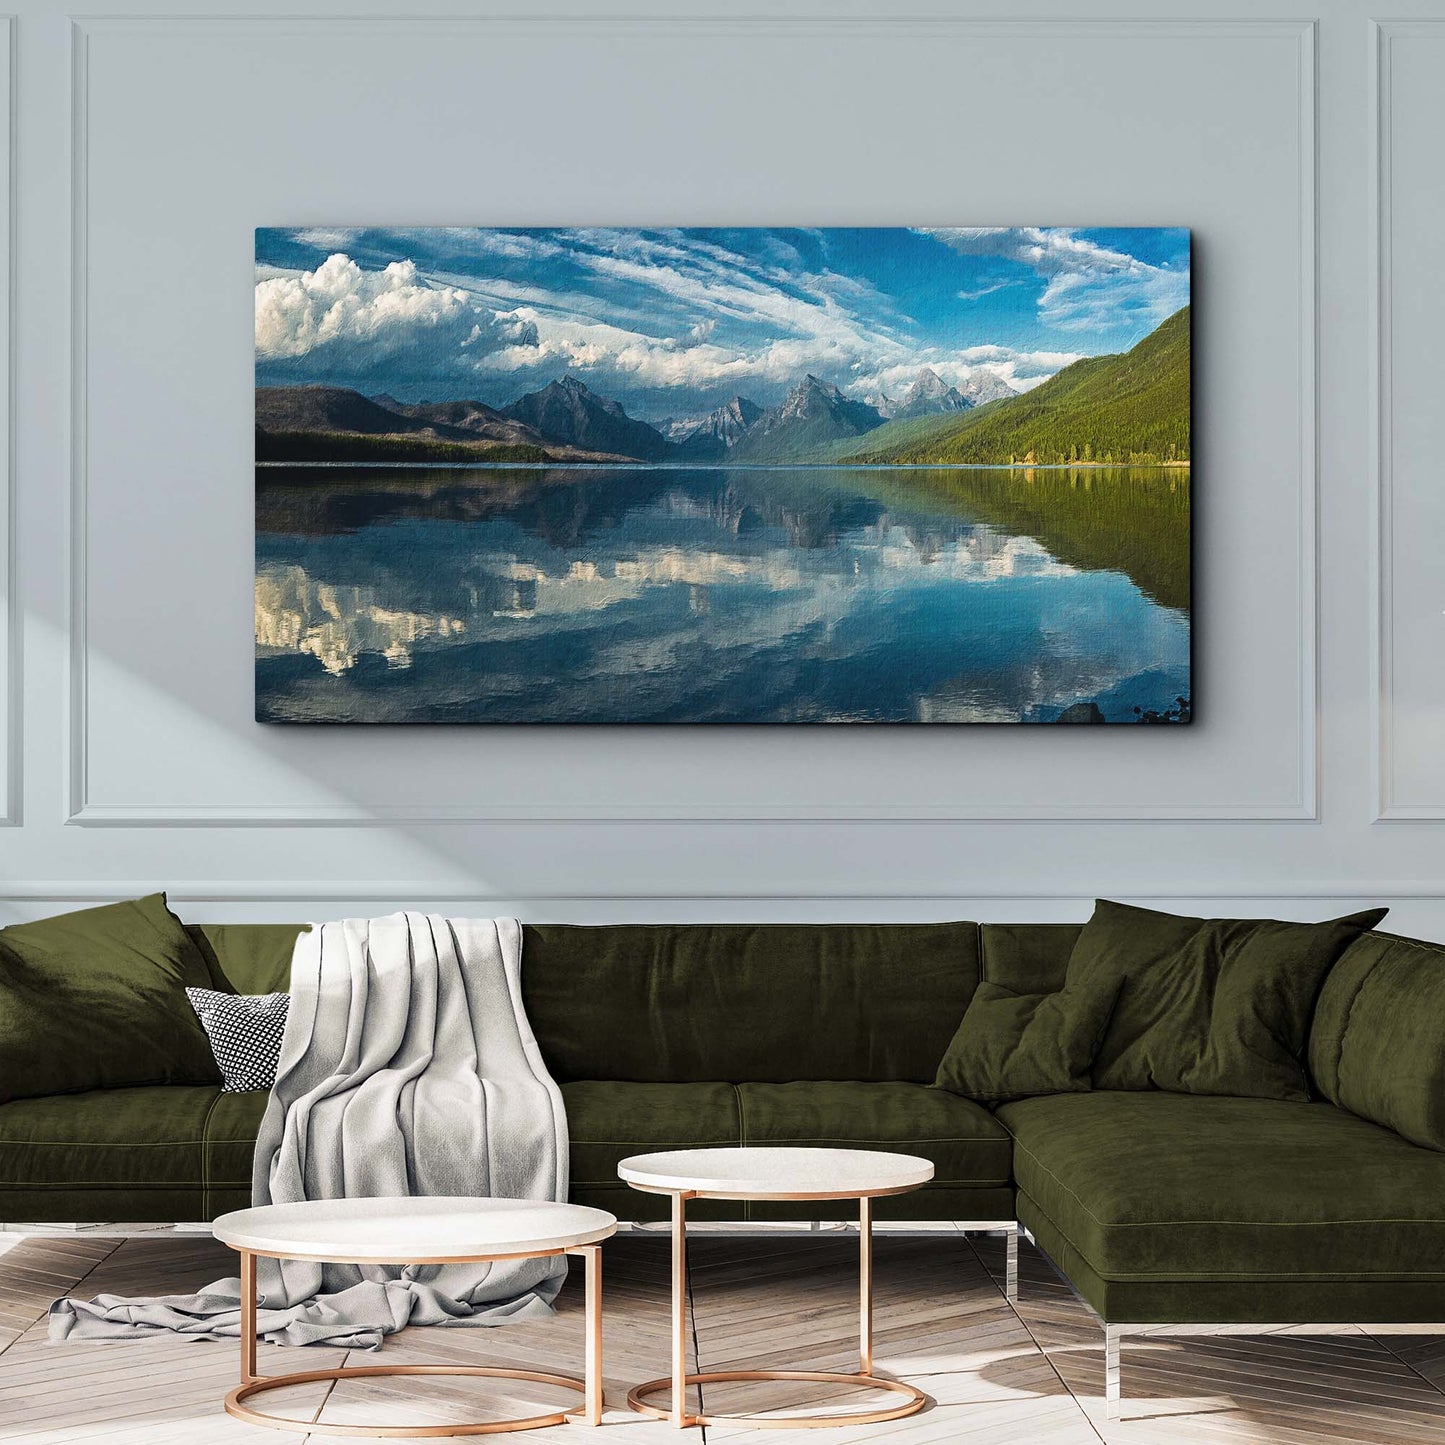 Lake McDonald Montana Canvas Wall Art Style 2 - Image by Tailored Canvases